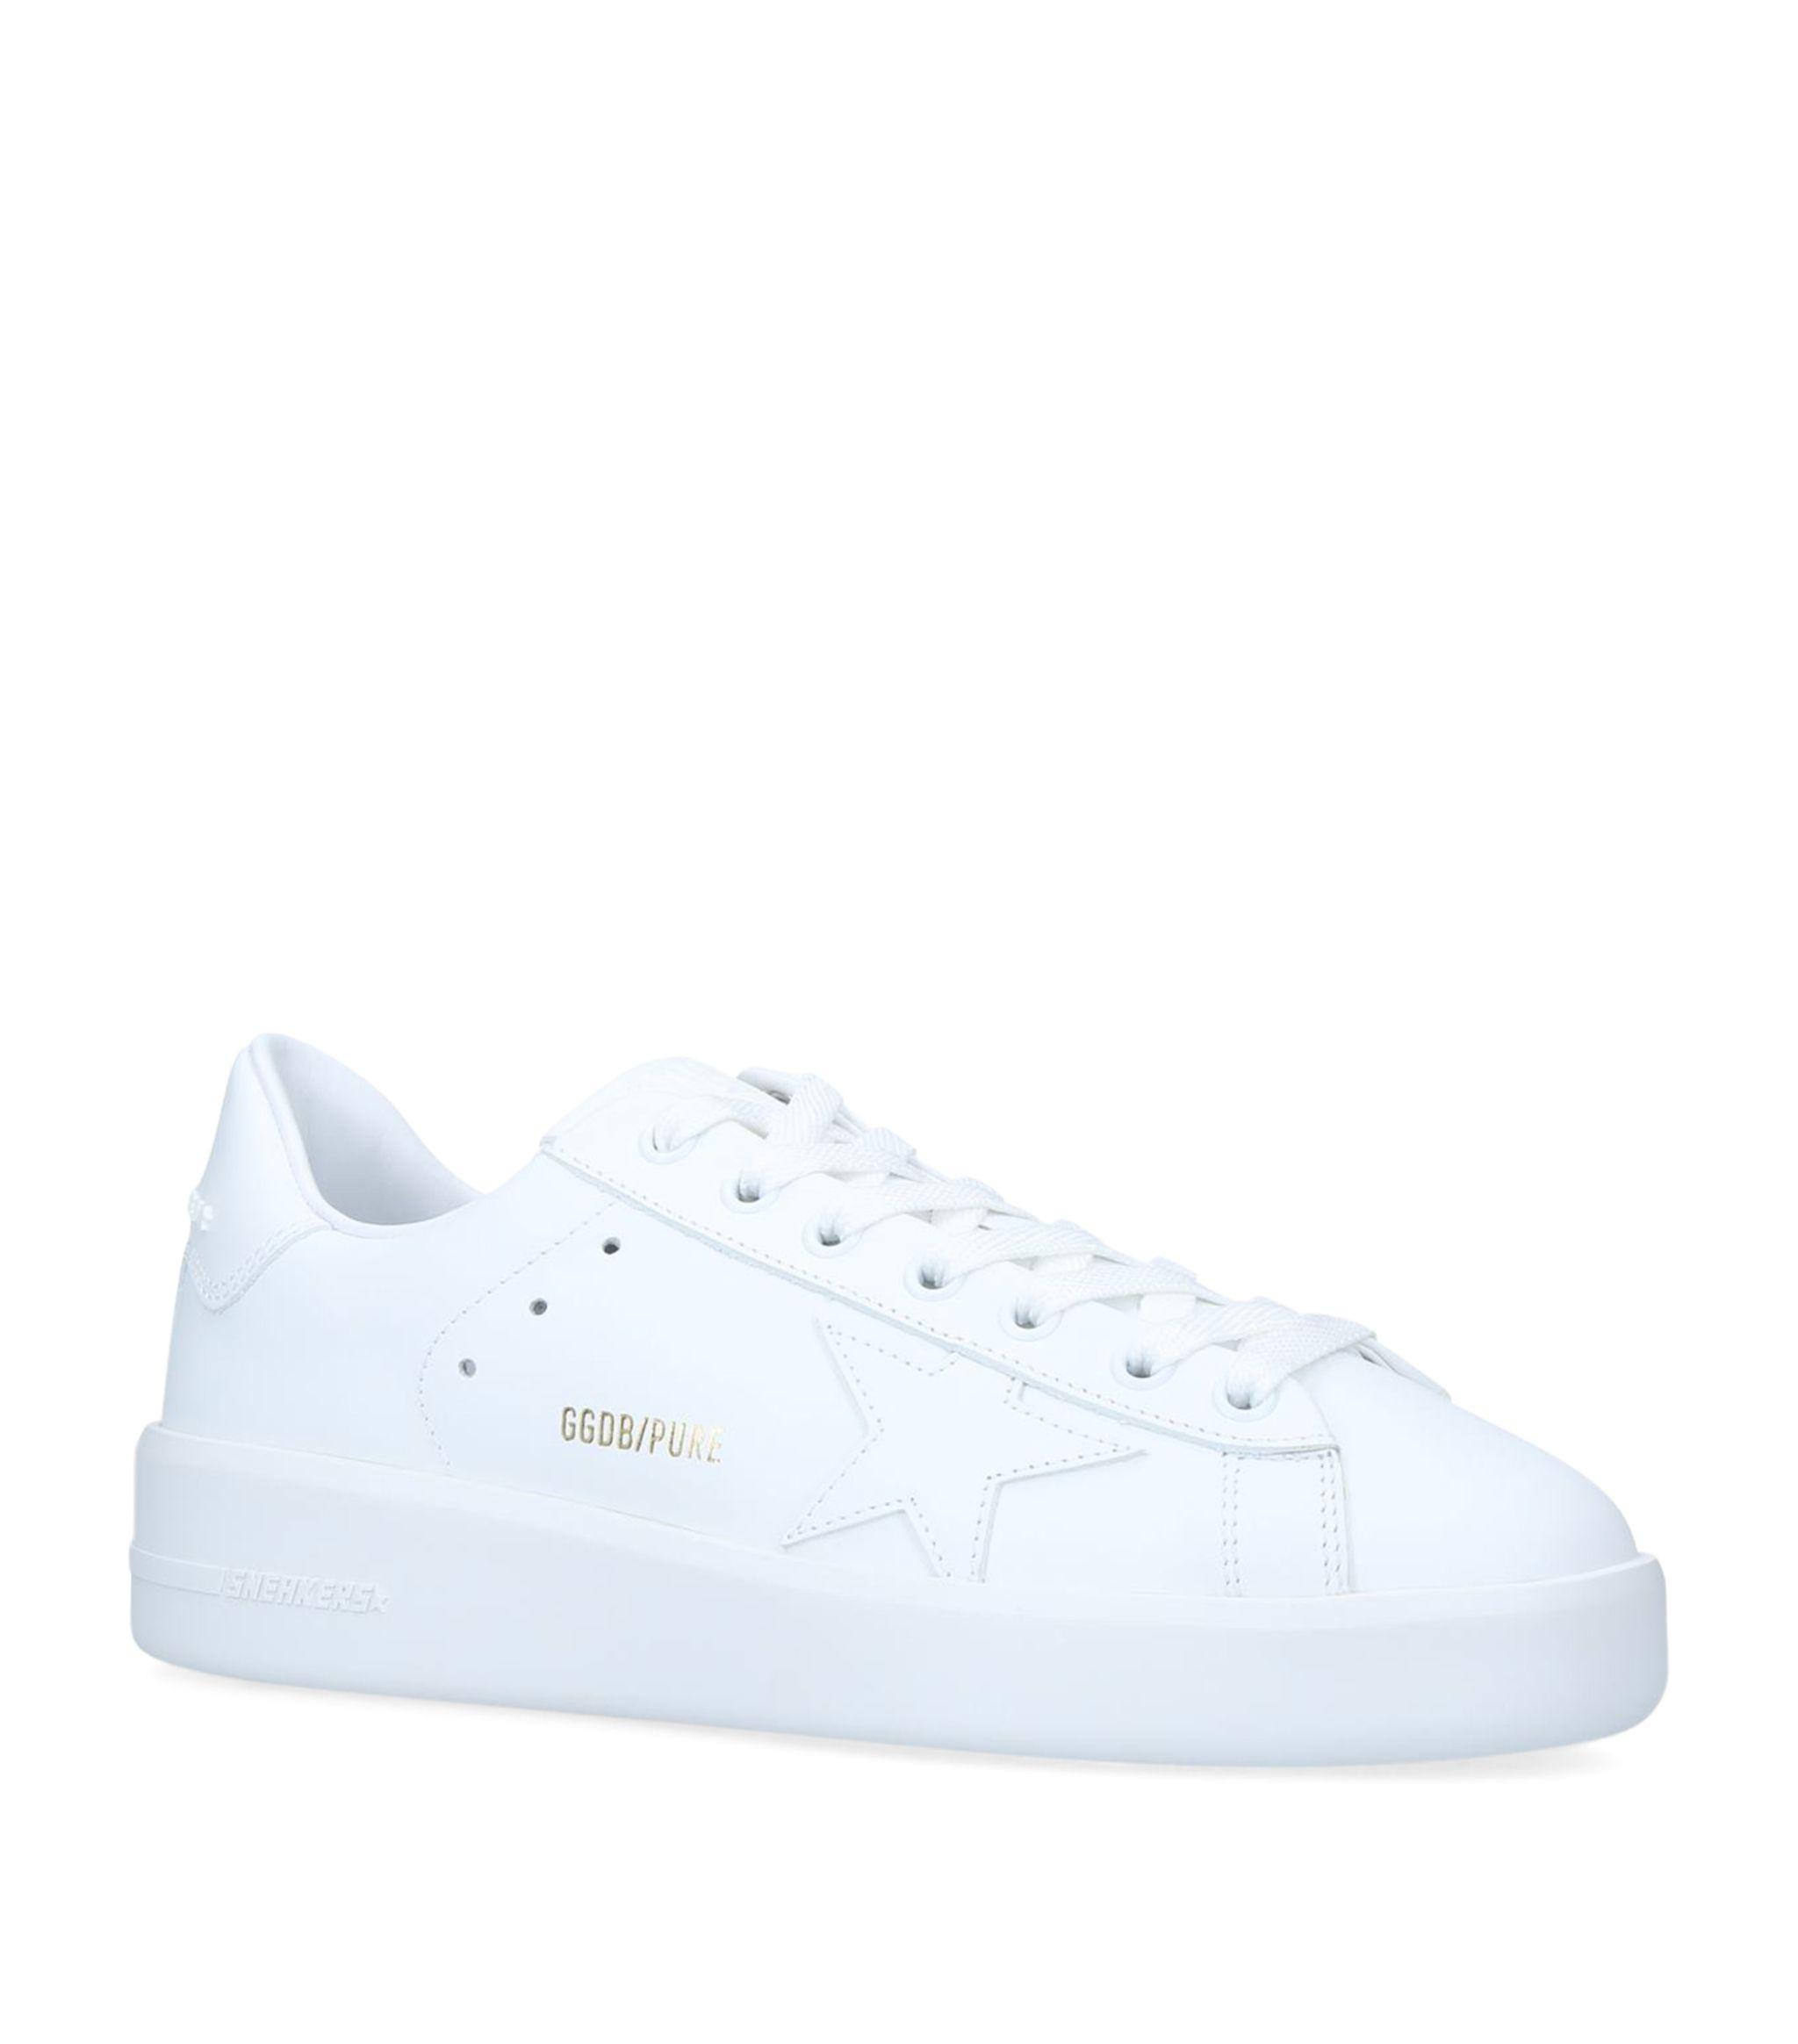 Golden Goose Deluxe Brand Leather Pure Star Sneakers in White - Lyst